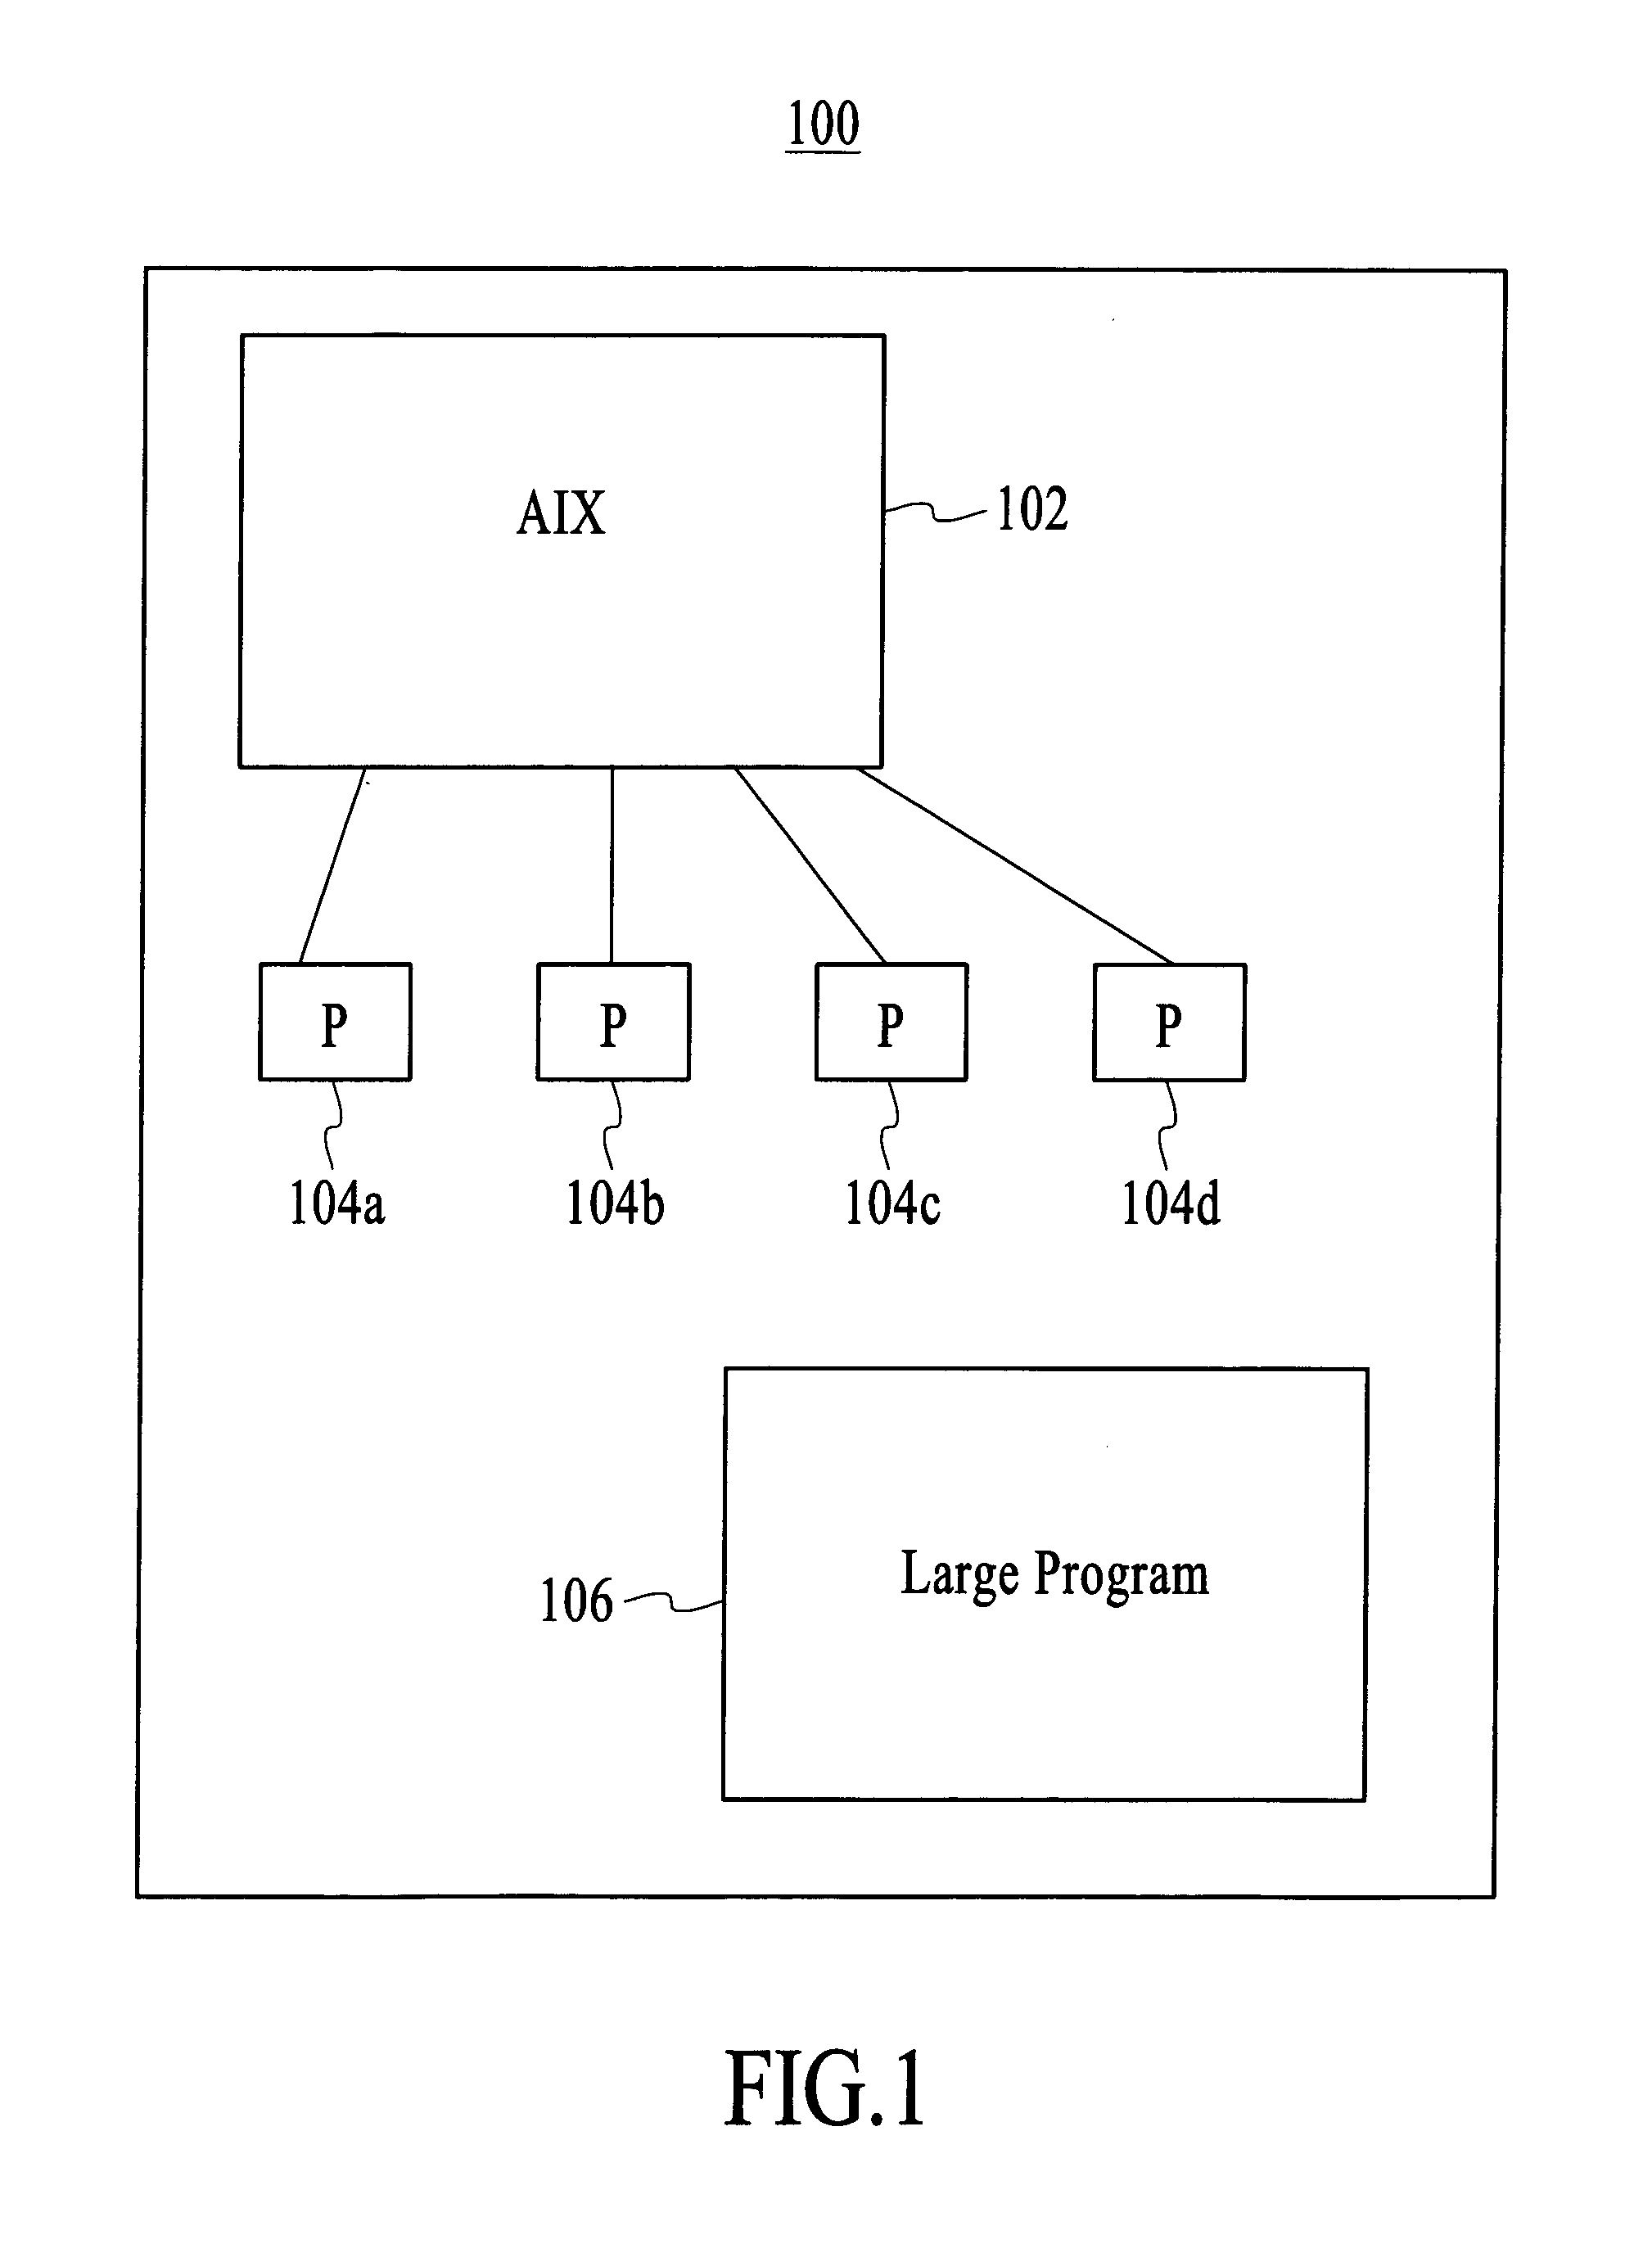 Method and system for minimizing the cycle time when compiling a program in a processing system